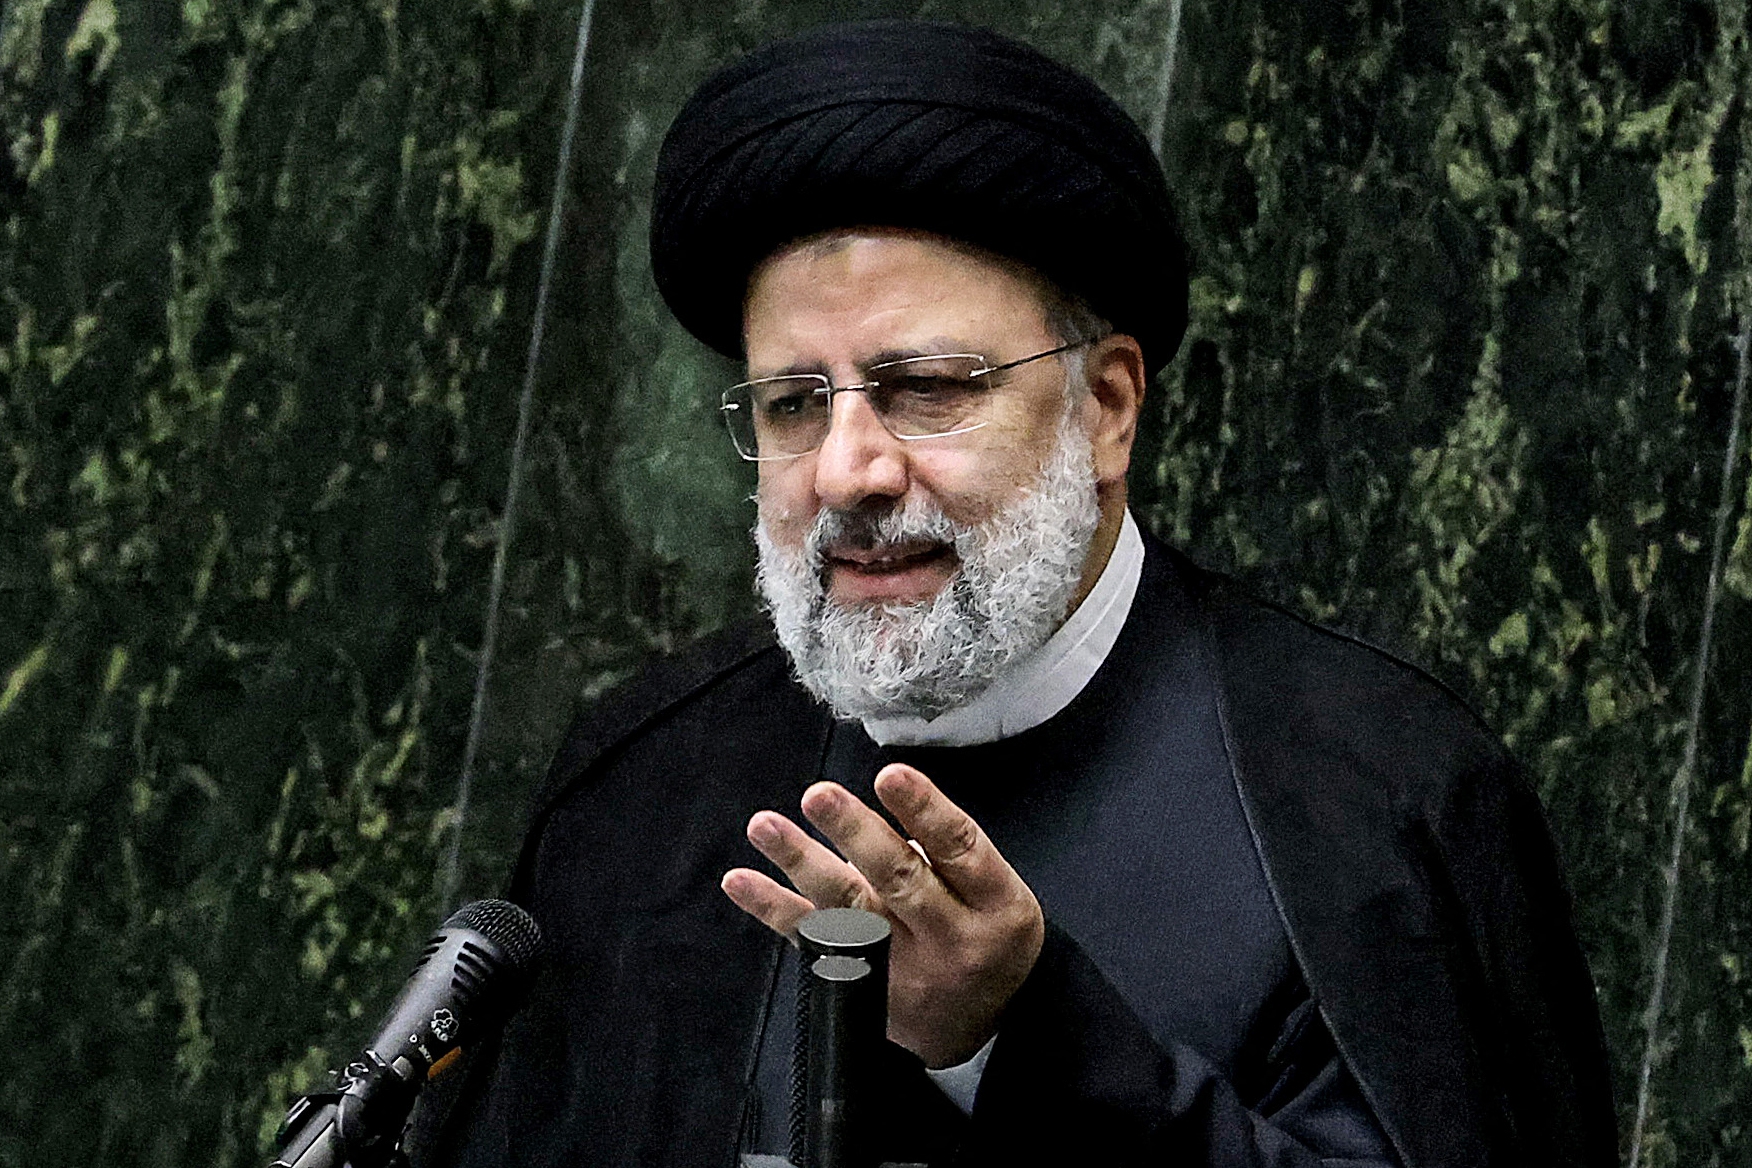 Iran's President Ebrahim Raisi speaks before parliament to defend his cabinet selection in the capital Tehran on 21 August 2021.